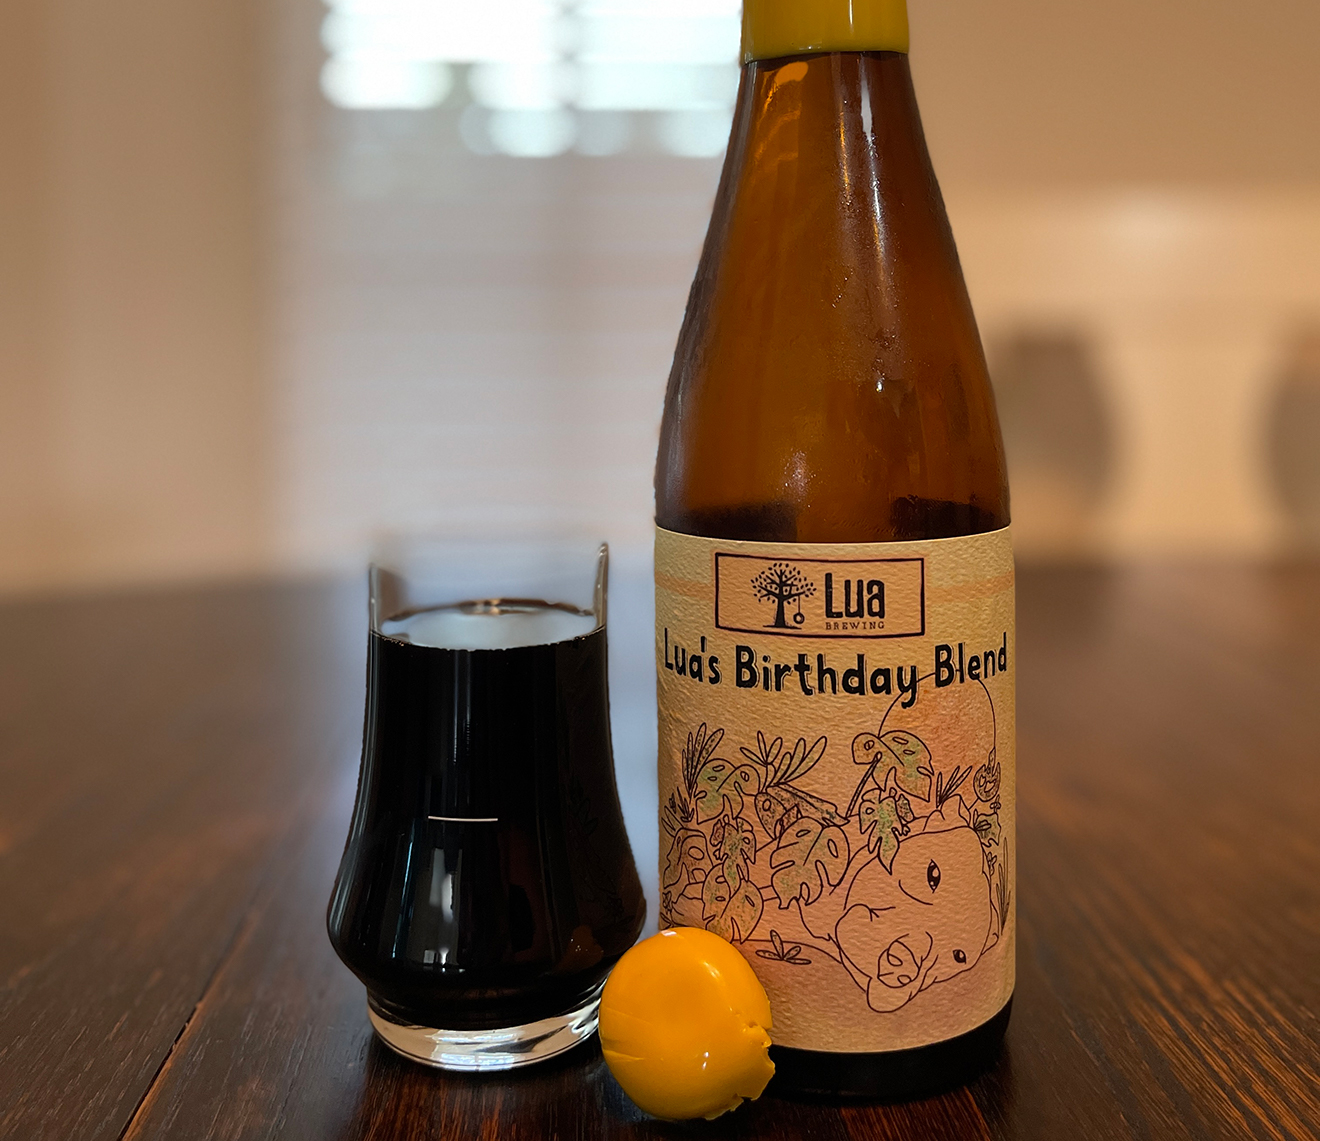 Review of Lua's Birthday Blend, a barleywine for the owner's dog Lua